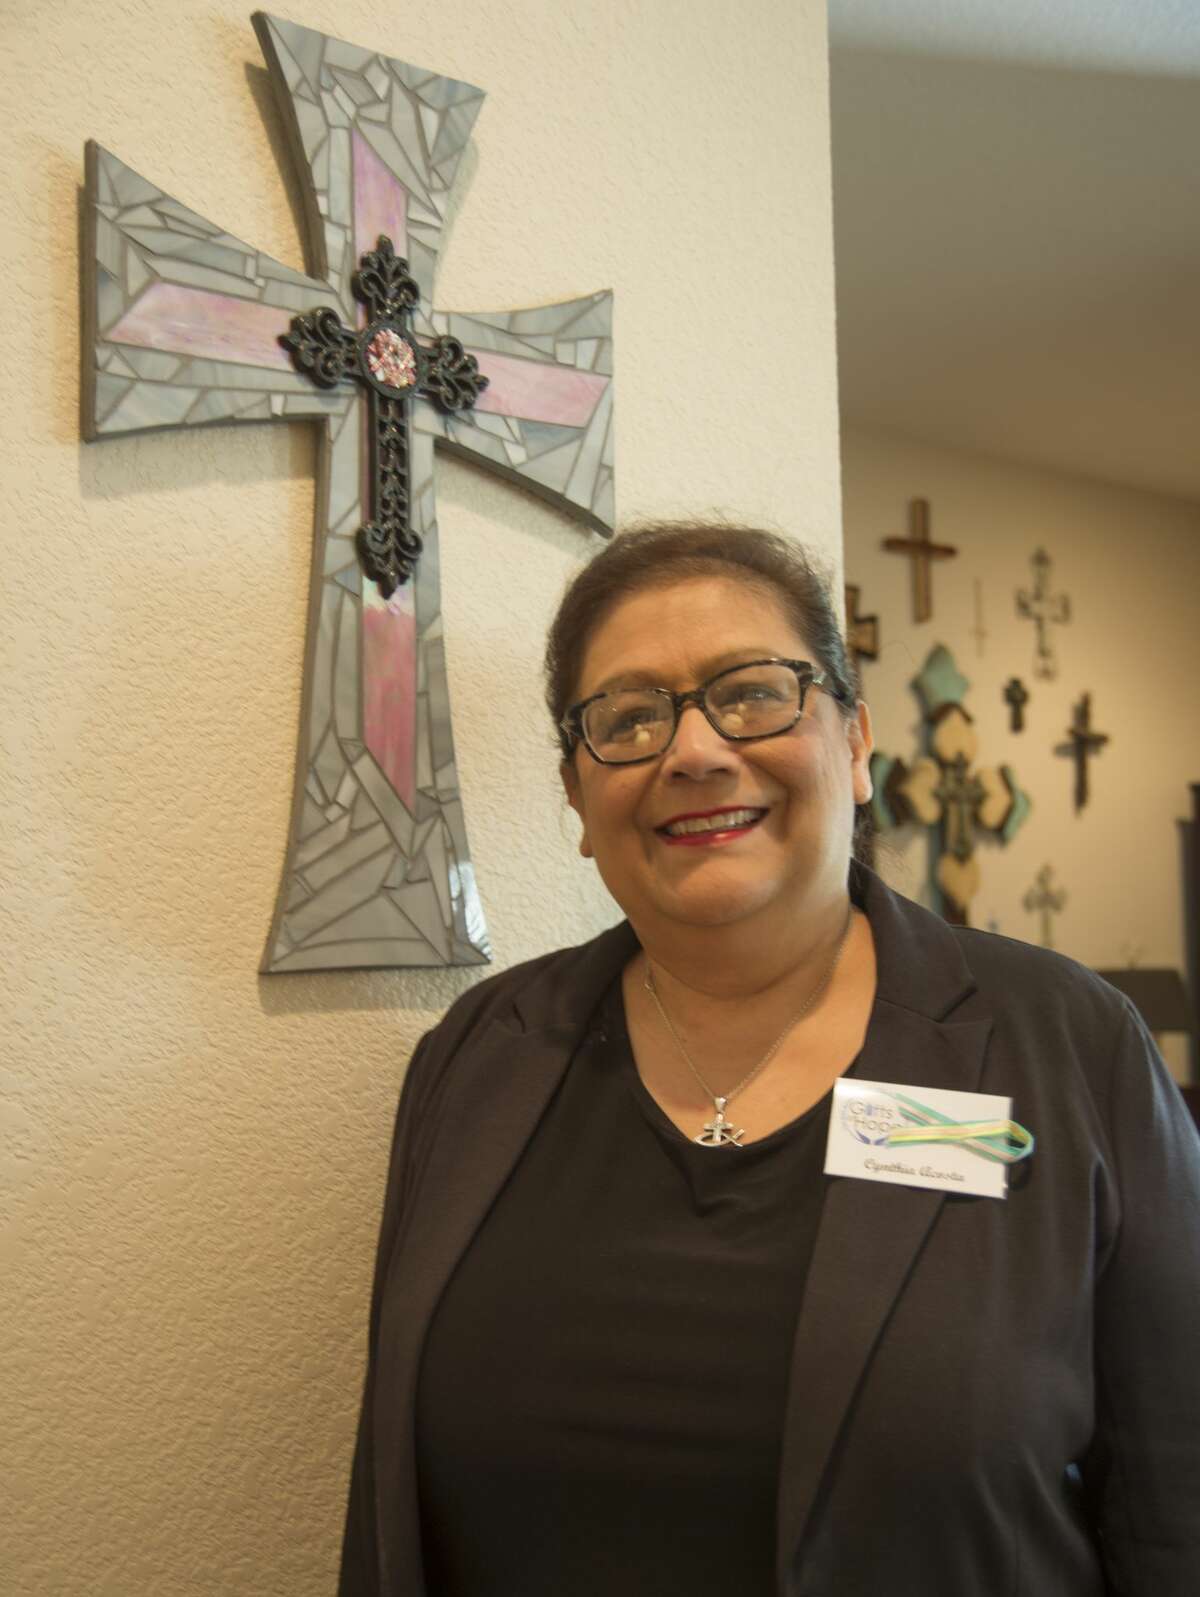 Cynthia Acosta, volunteer at Gifts of Hope and cancer patient.